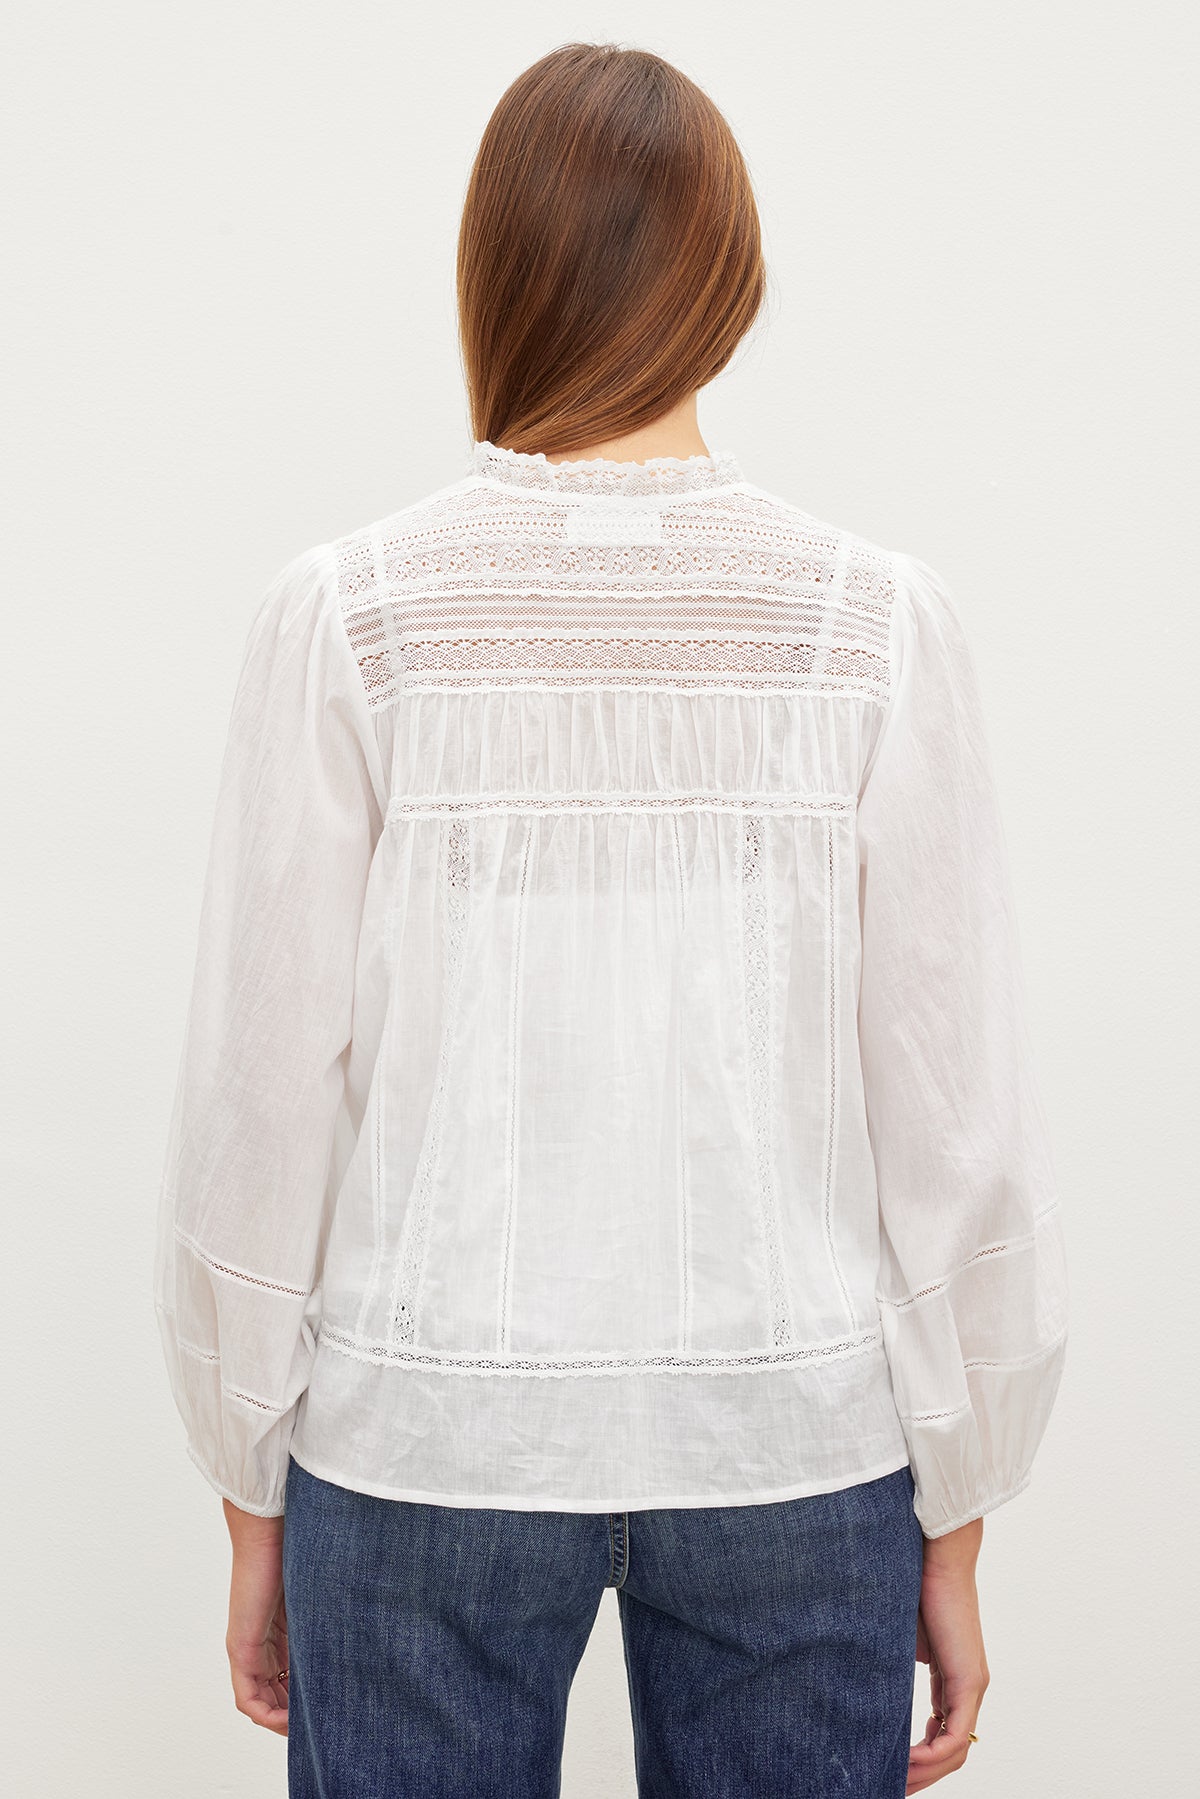 The back view of a woman wearing a Velvet by Graham & Spencer LIAM COTTON LACE BUTTON FRONT TOP.-35982303756481